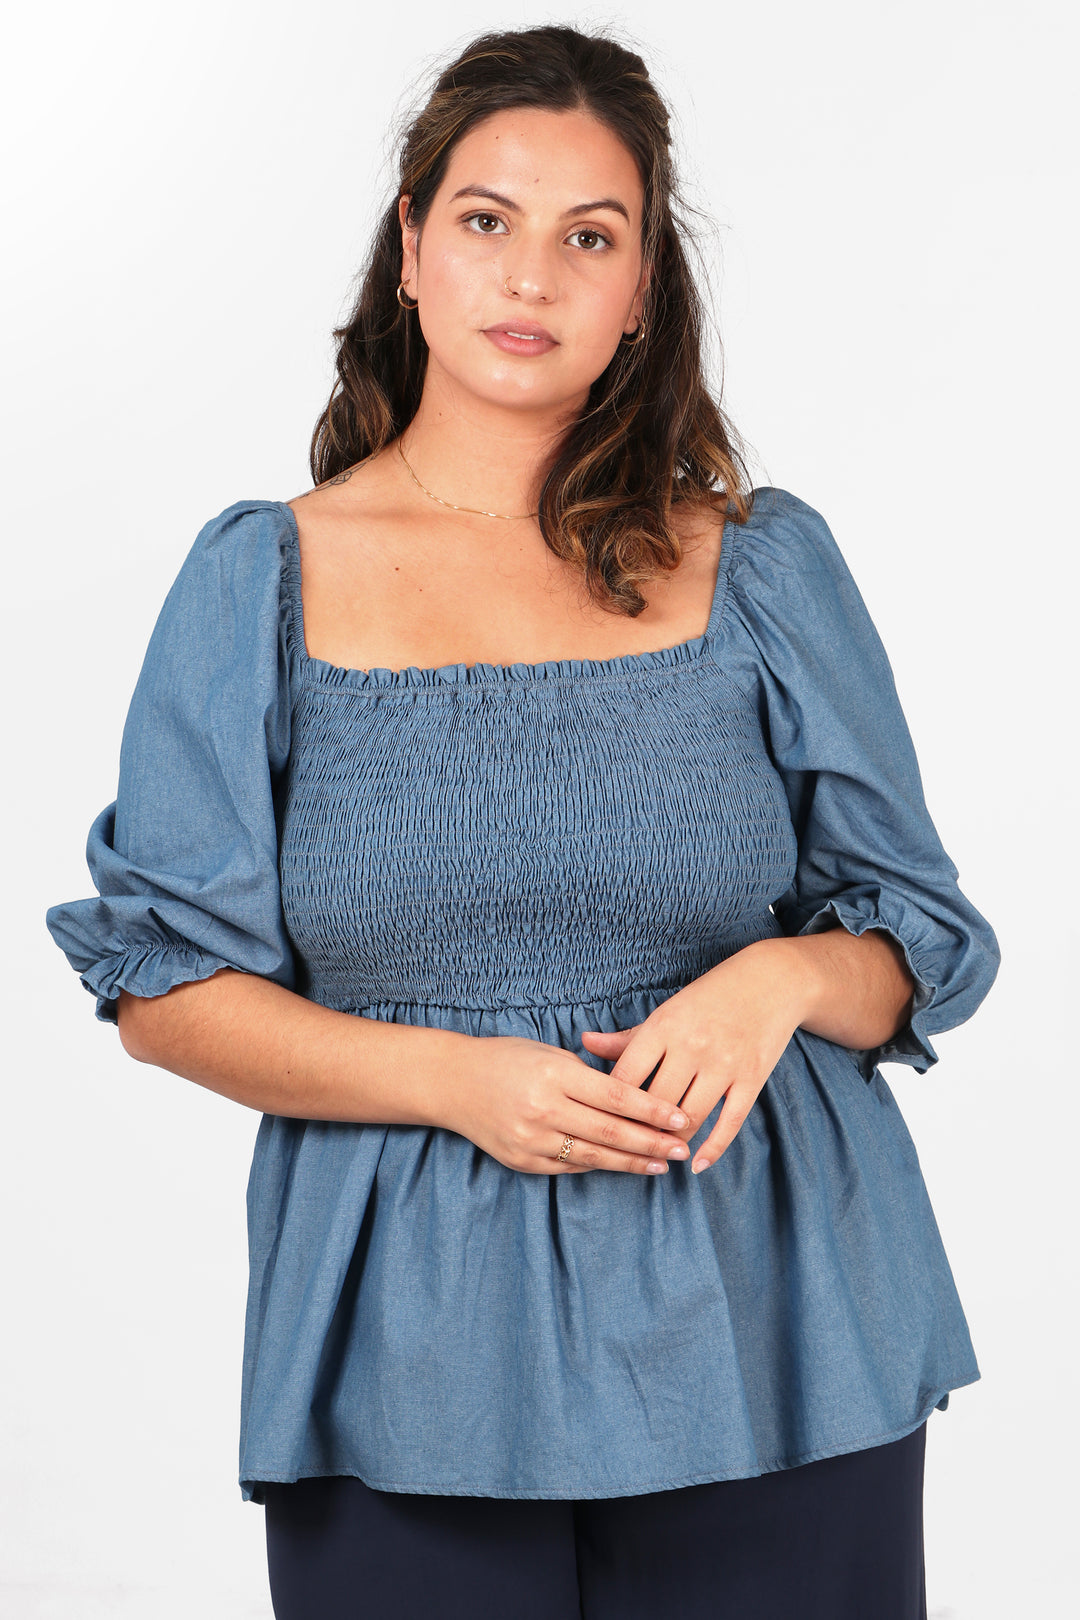 model wearing a denim blue peplum top with a shirred bodice, square neckline and 3/4 sleeves